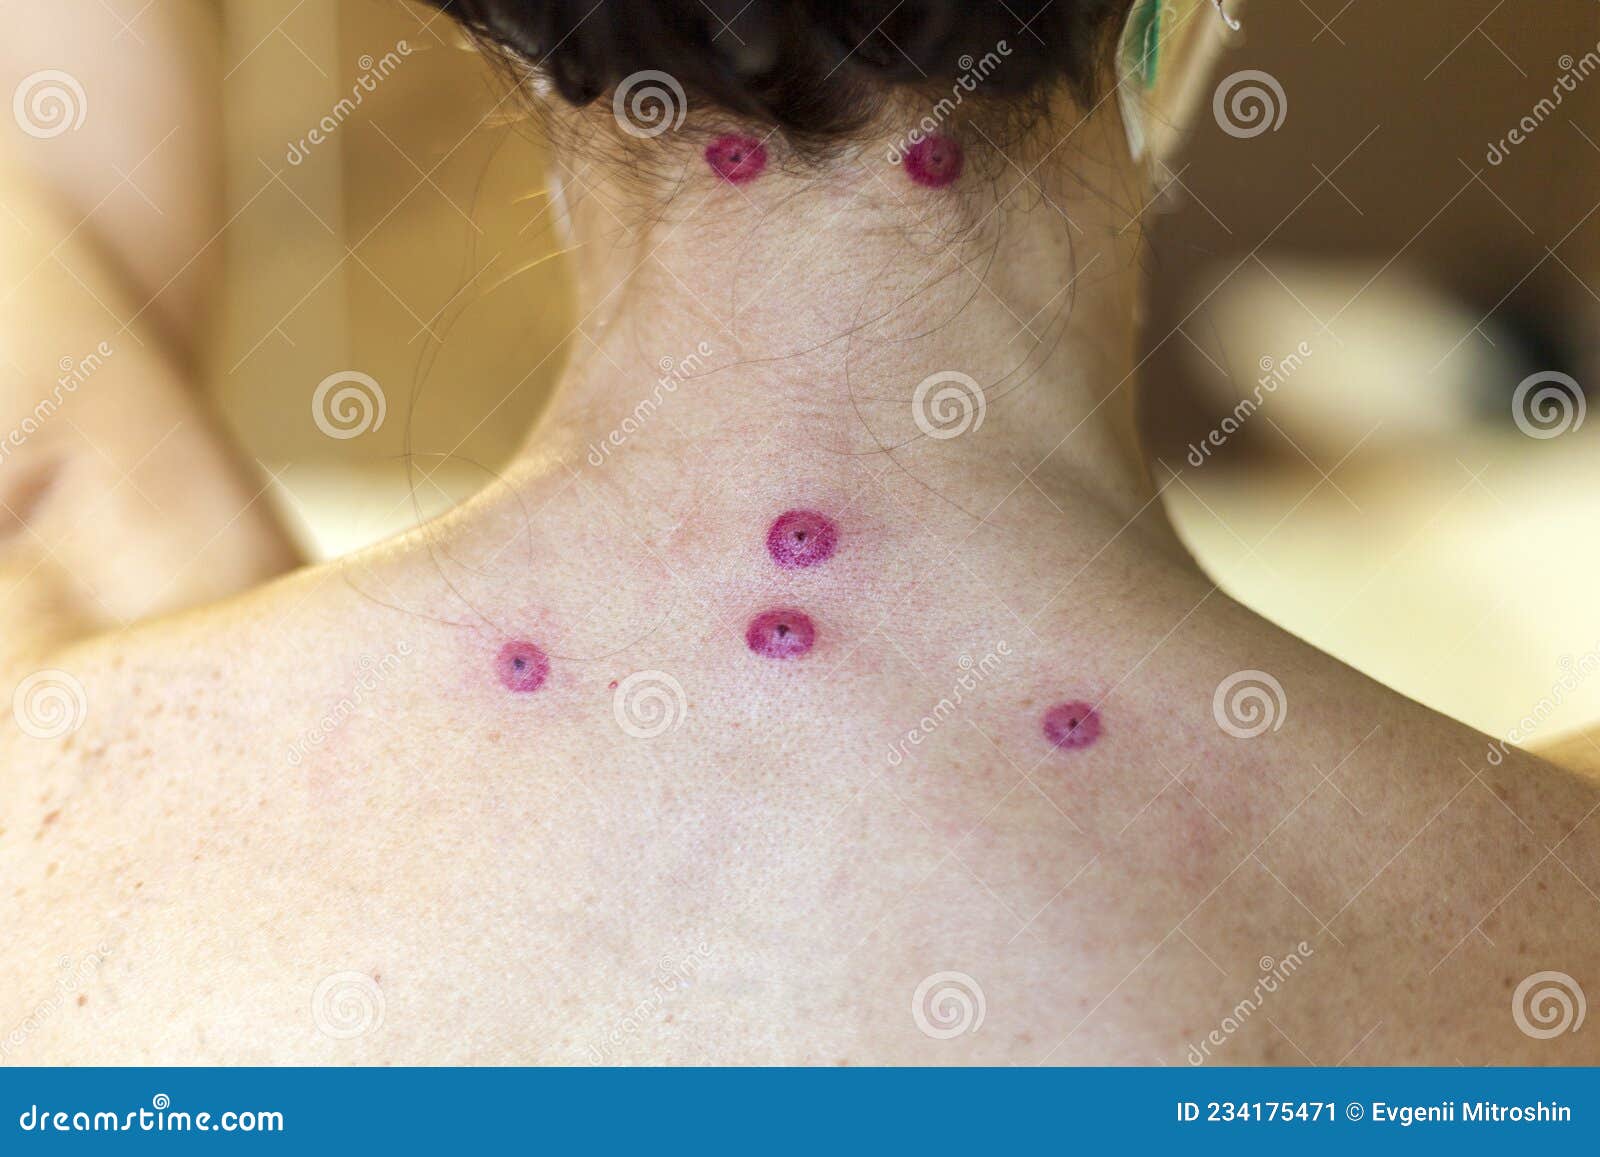 https://thumbs.dreamstime.com/z/hirudotherapy-leech-bite-marks-girl-s-back-hirudotherapy-leech-bite-marks-girl-s-back-treatment-leeches-234175471.jpg